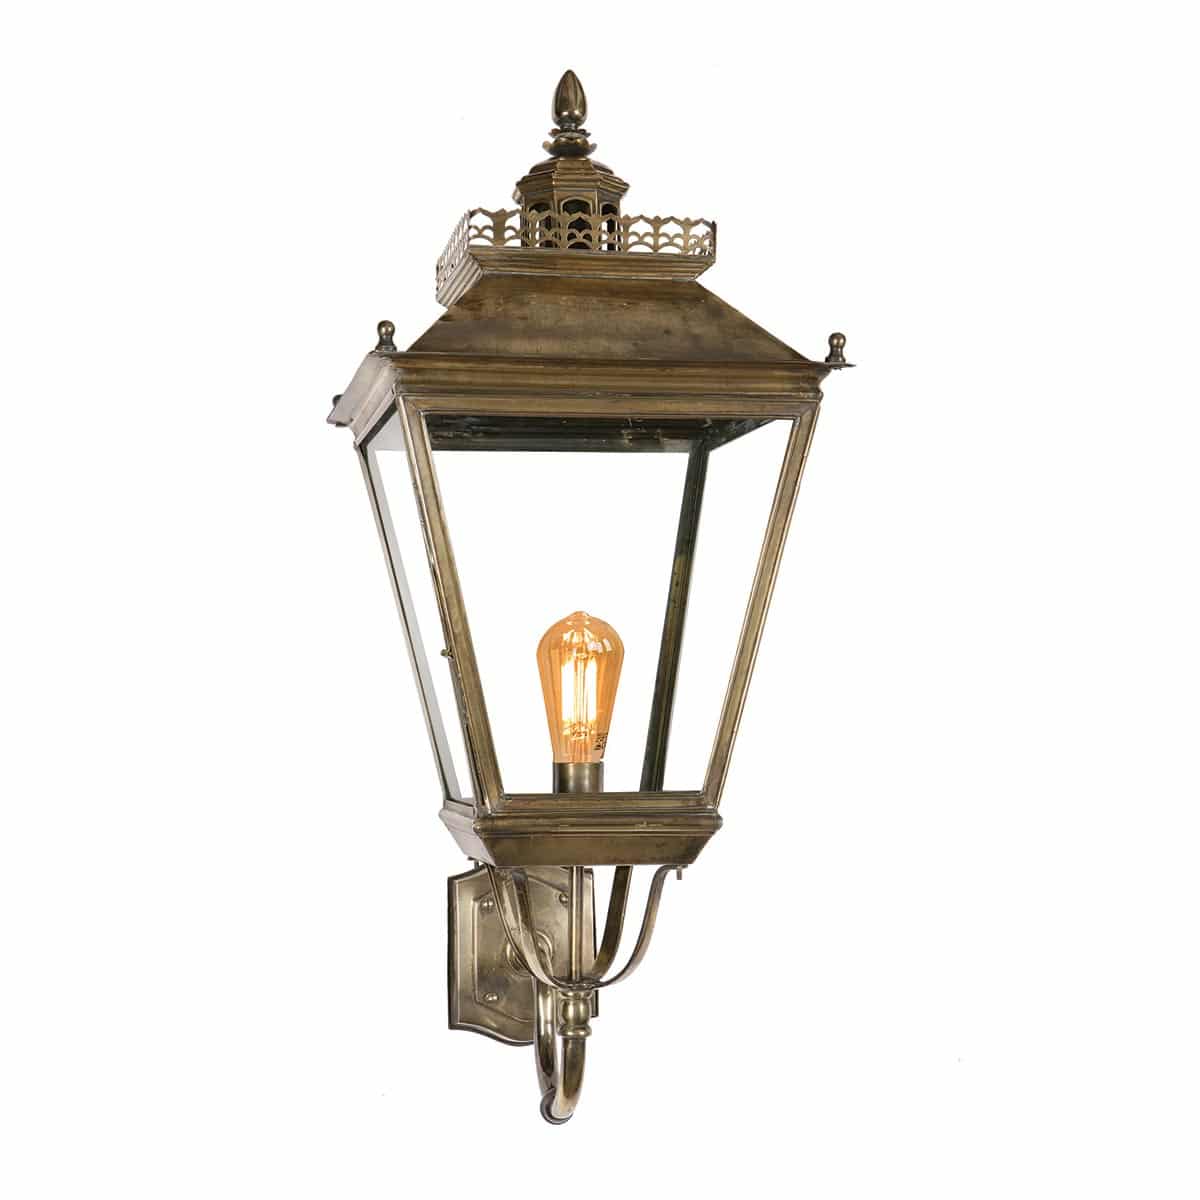 Chateau Large 1 Light Victorian Outdoor Wall Lantern Solid Brass